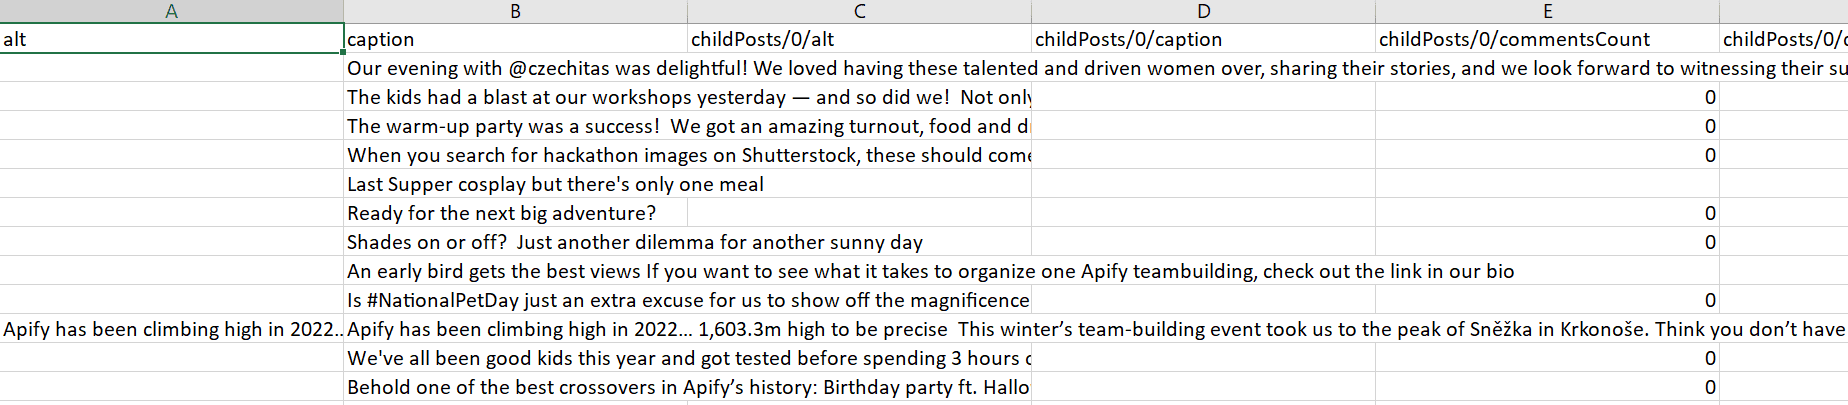 Scraped data from Instagram posts in Excel